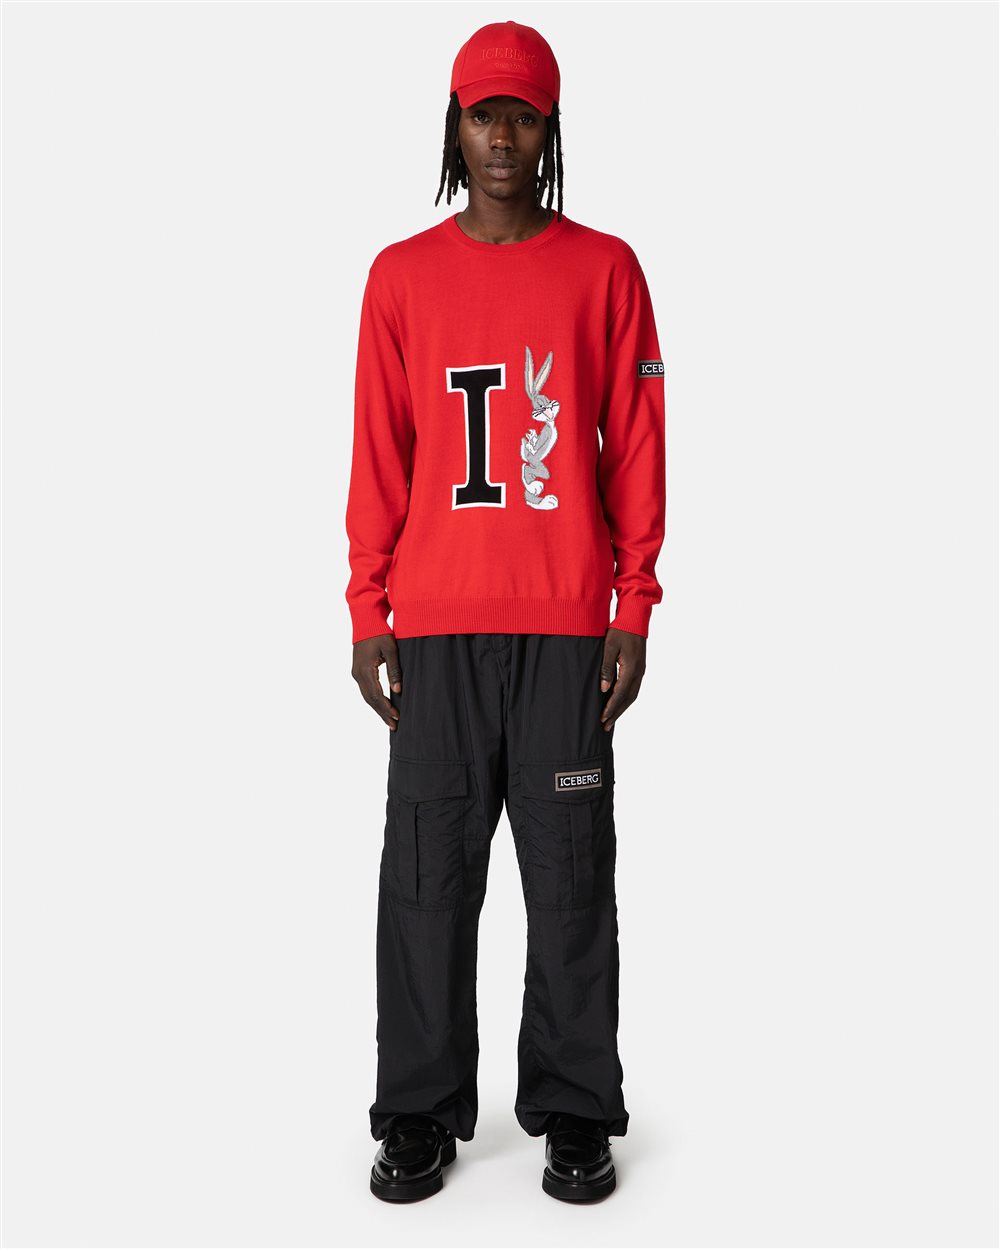 Red sweater with cartoon detail - Iceberg - Official Website